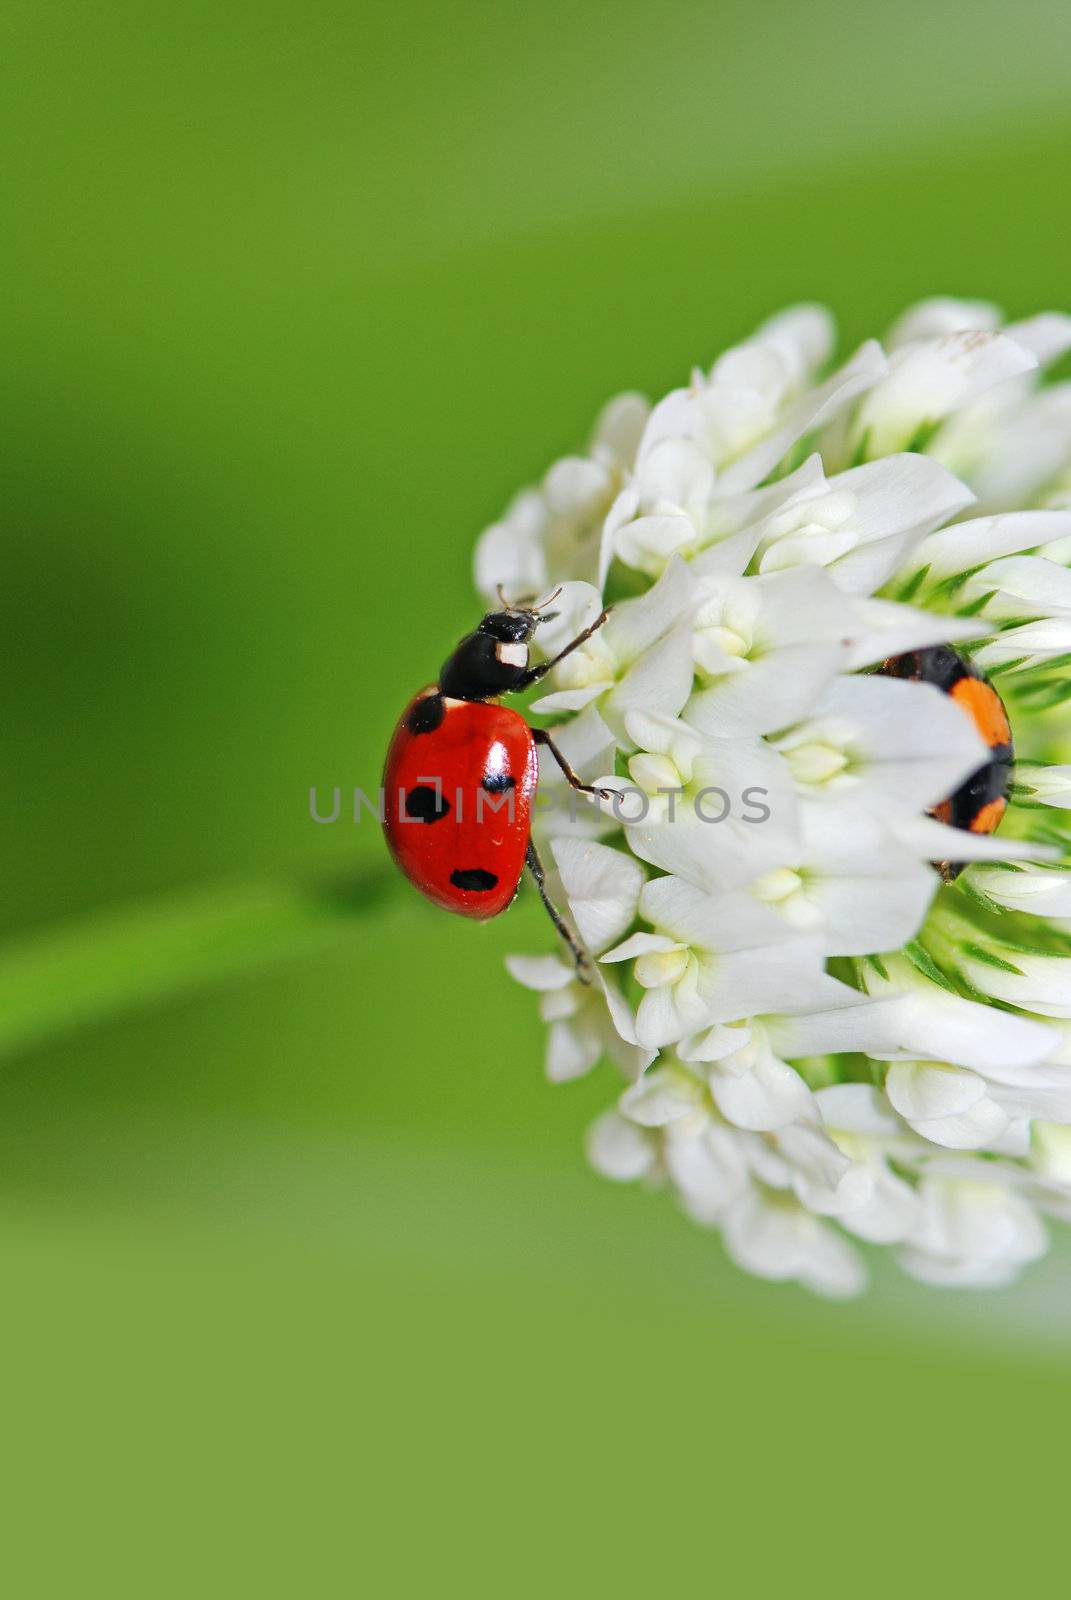 Red ladybug spend parked in the white flower